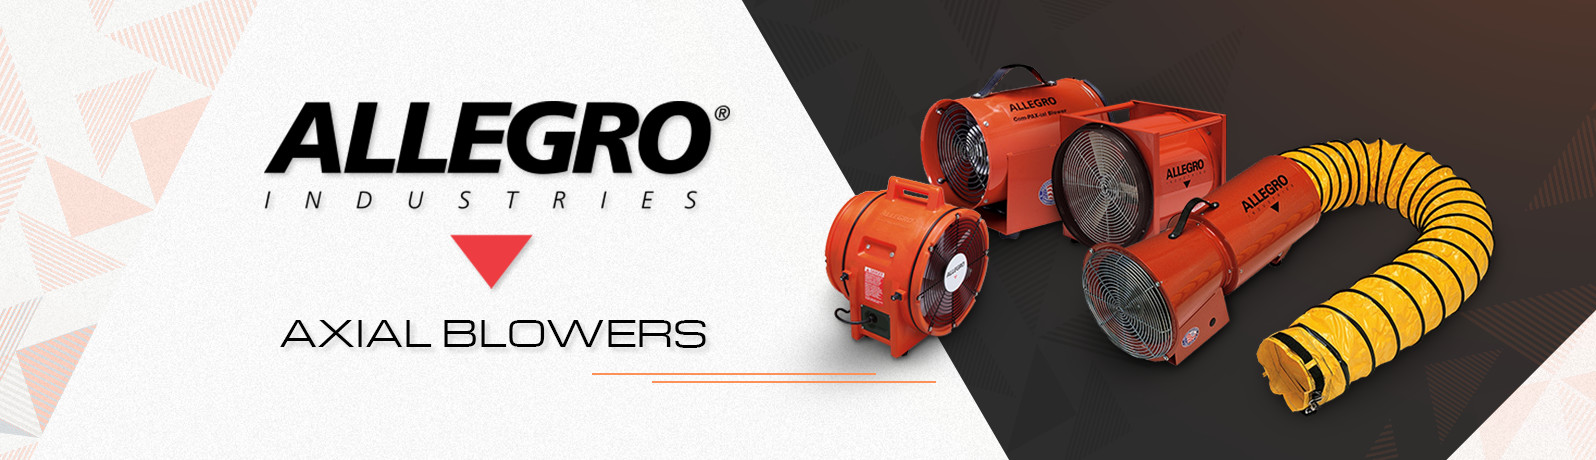 Allegro Axial Blowers on Sale - Mega Depot